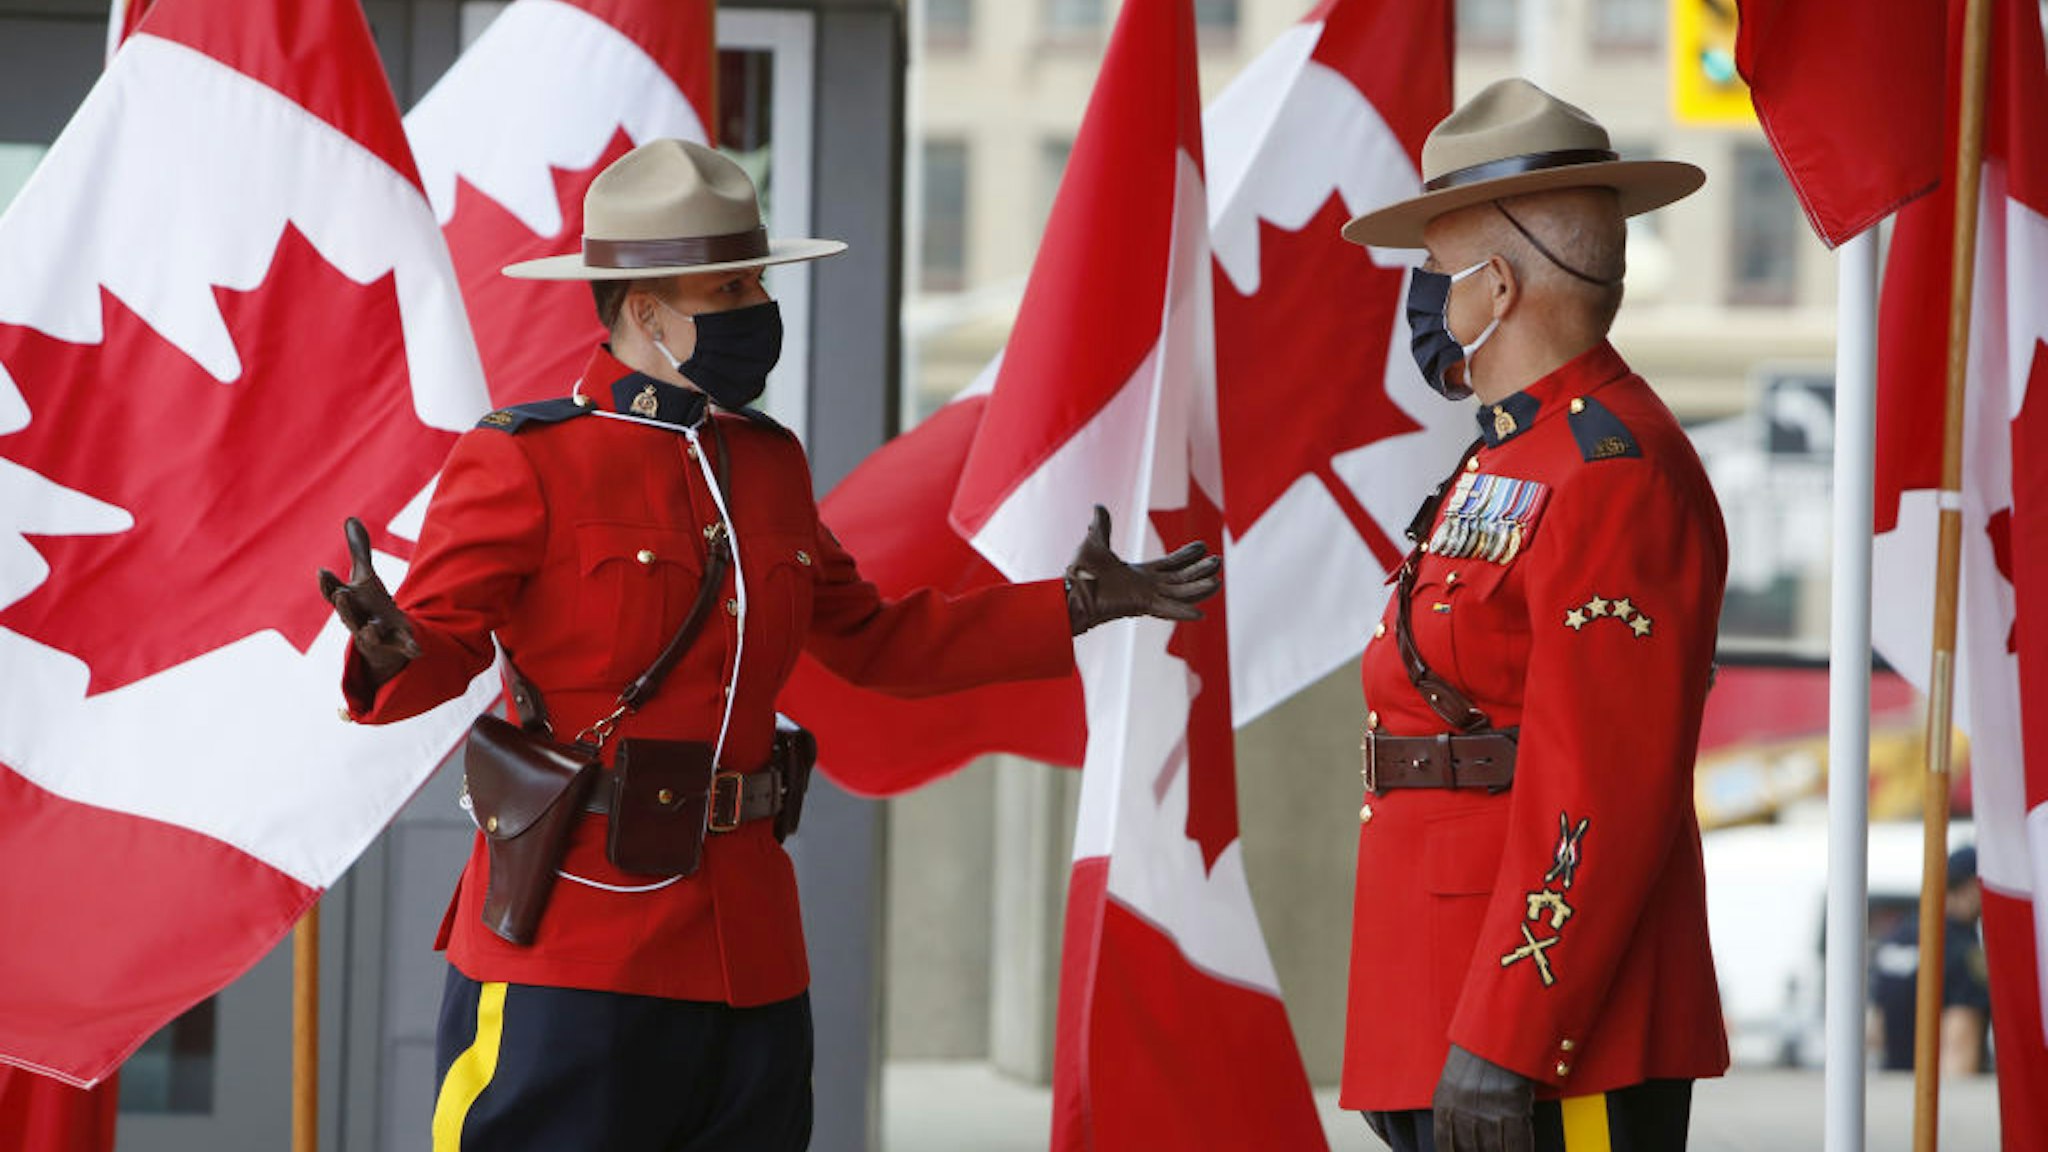 Royal Canadian Mounted Police officers (RCMP) wearing protective masks stand outside the Senate of Canada before the Throne Speech in Ottawa, Ontario, Canada, on Wednesday, Sept. 23, 2020. Prime Minister Justin Trudeau says his government will launch a campaign to create 1 million jobs in Canada, returning employment to pre-pandemic levels